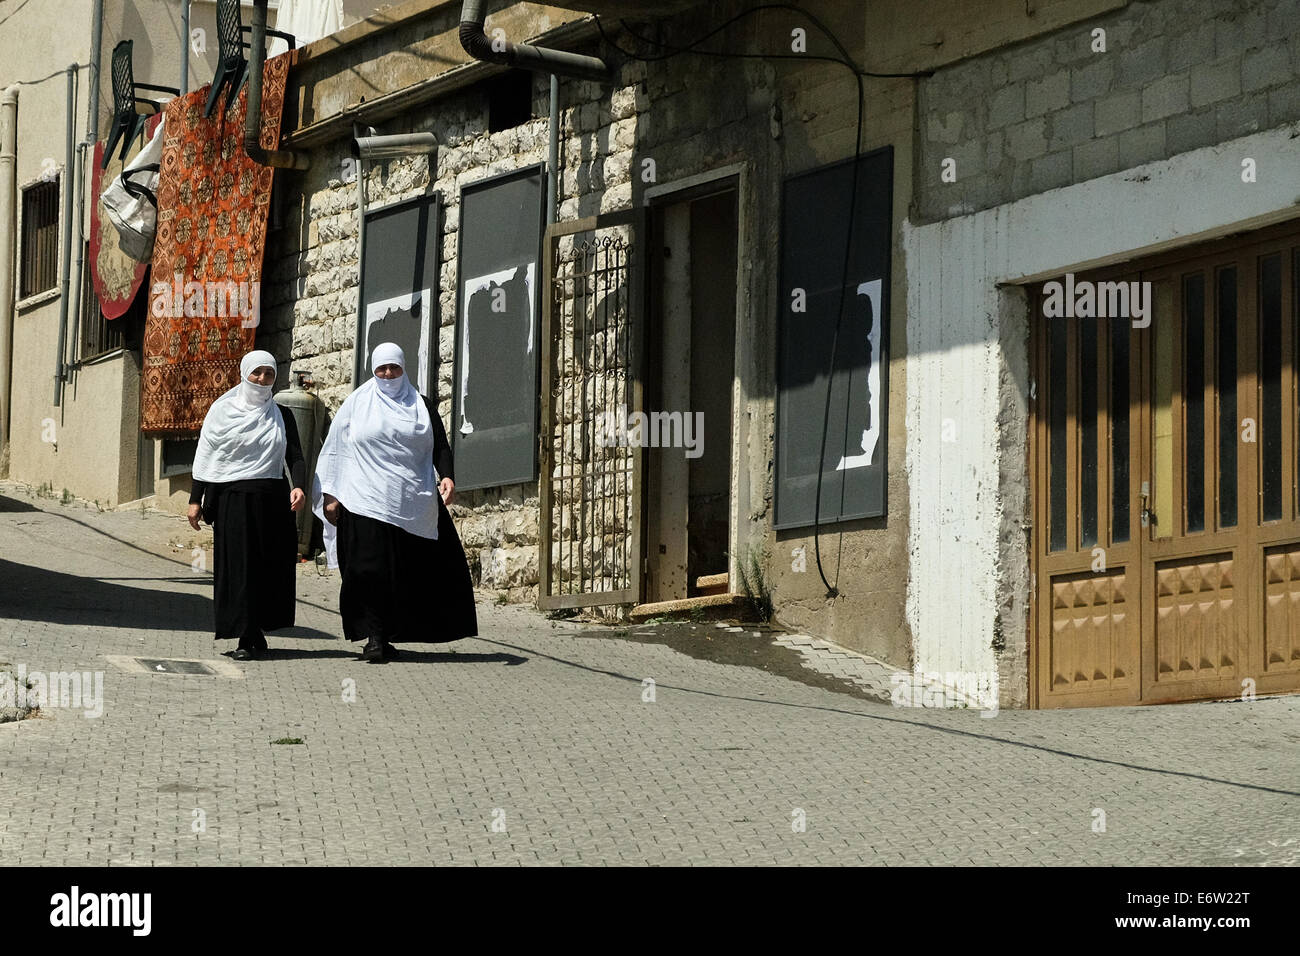 Golan Heights, Israel. 31st Aug, 2014. Druze women walk down a street in the city of Majdal Shams in the Golan Heights, home to a population of over 10,000. Since the beginning of the Syrian revolt Israel is seeing an increase in Druze residents requesting Israeli citizenship, now more willing to openly admit their appreciation of Israel's liberal democracy and less weary of Syrian retribution. Credit:  Nir Alon/Alamy Live News Stock Photo